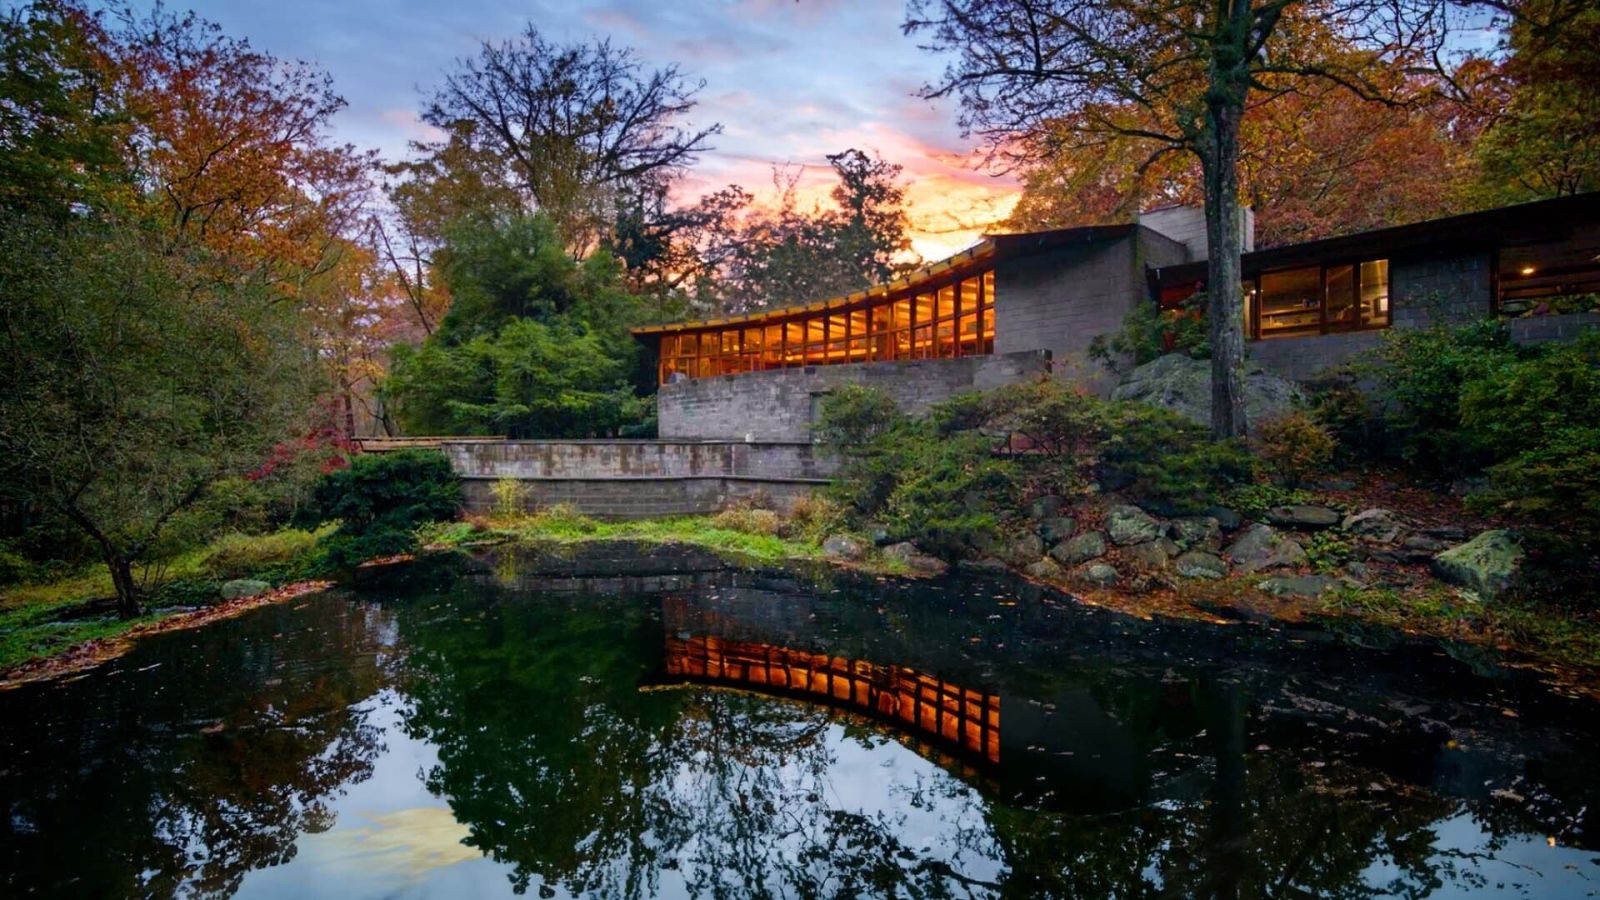 Inside One of Frank Lloyd Wright’s Final-Ever Designs